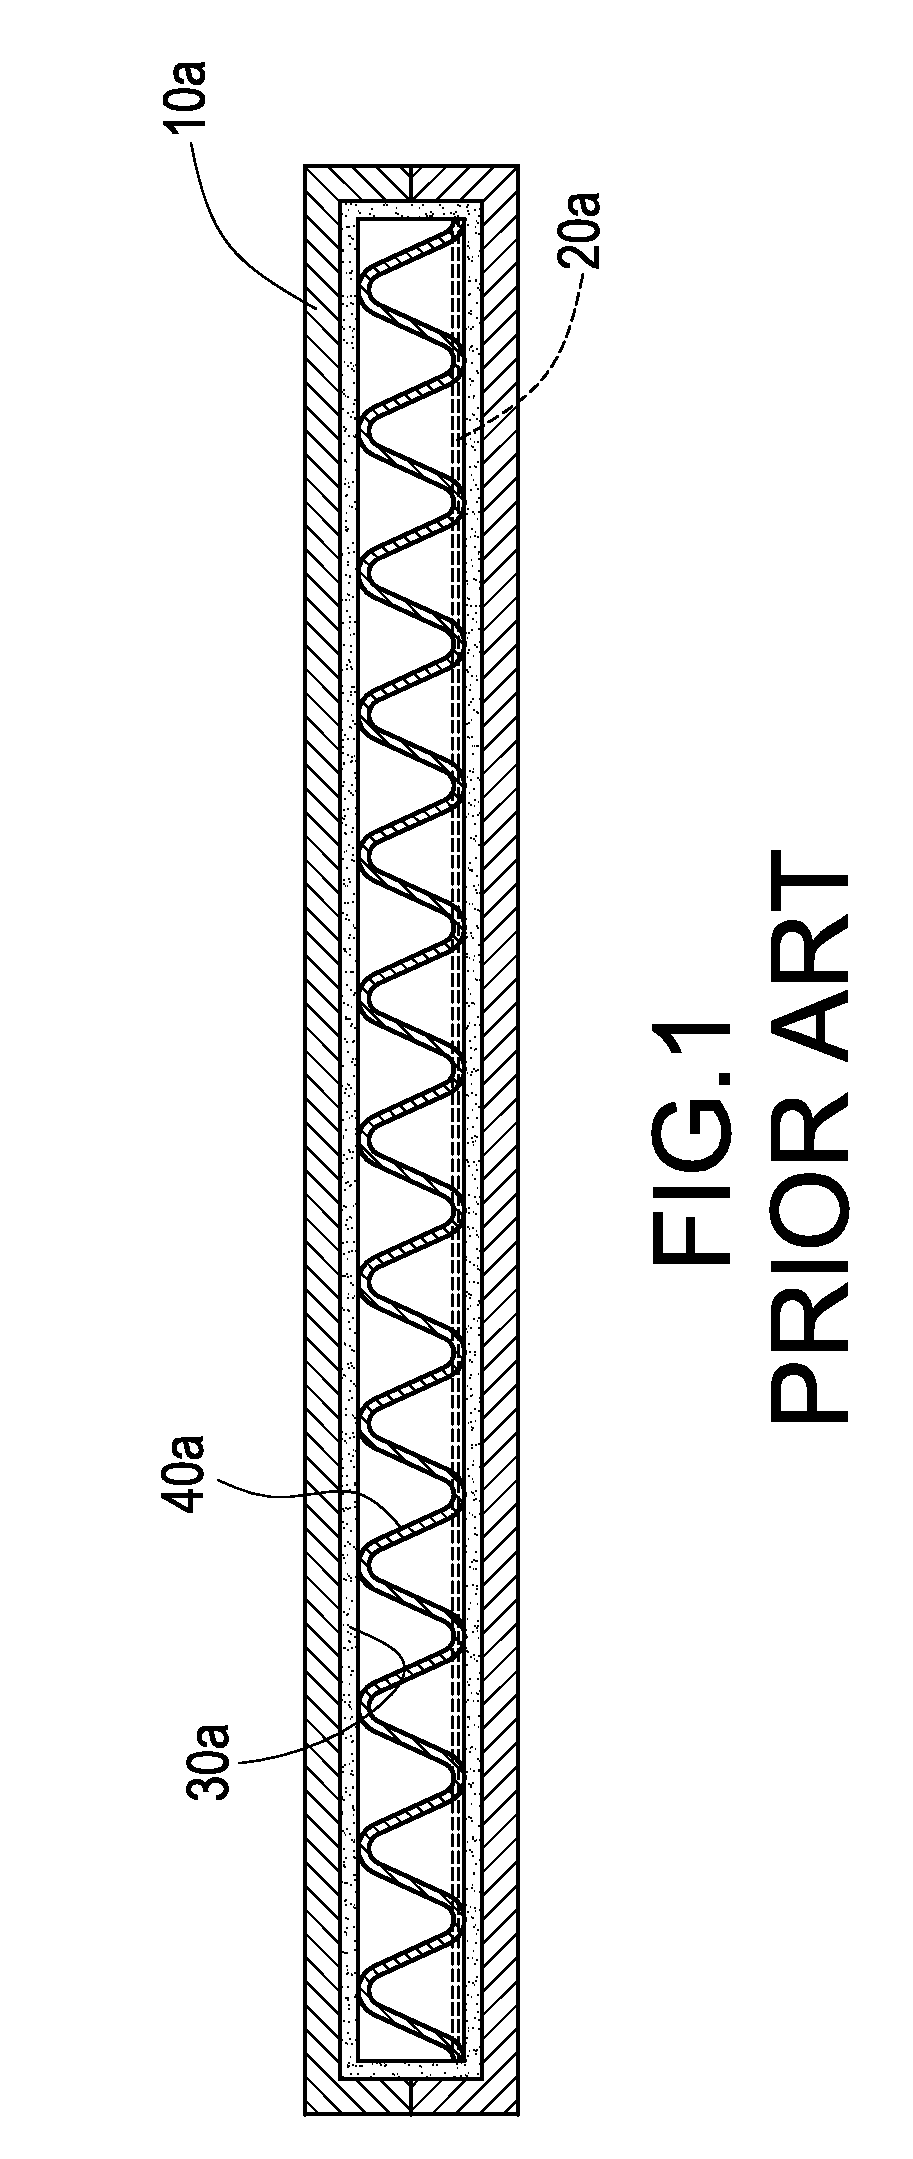 Vapor chamber and supporting structure thereof